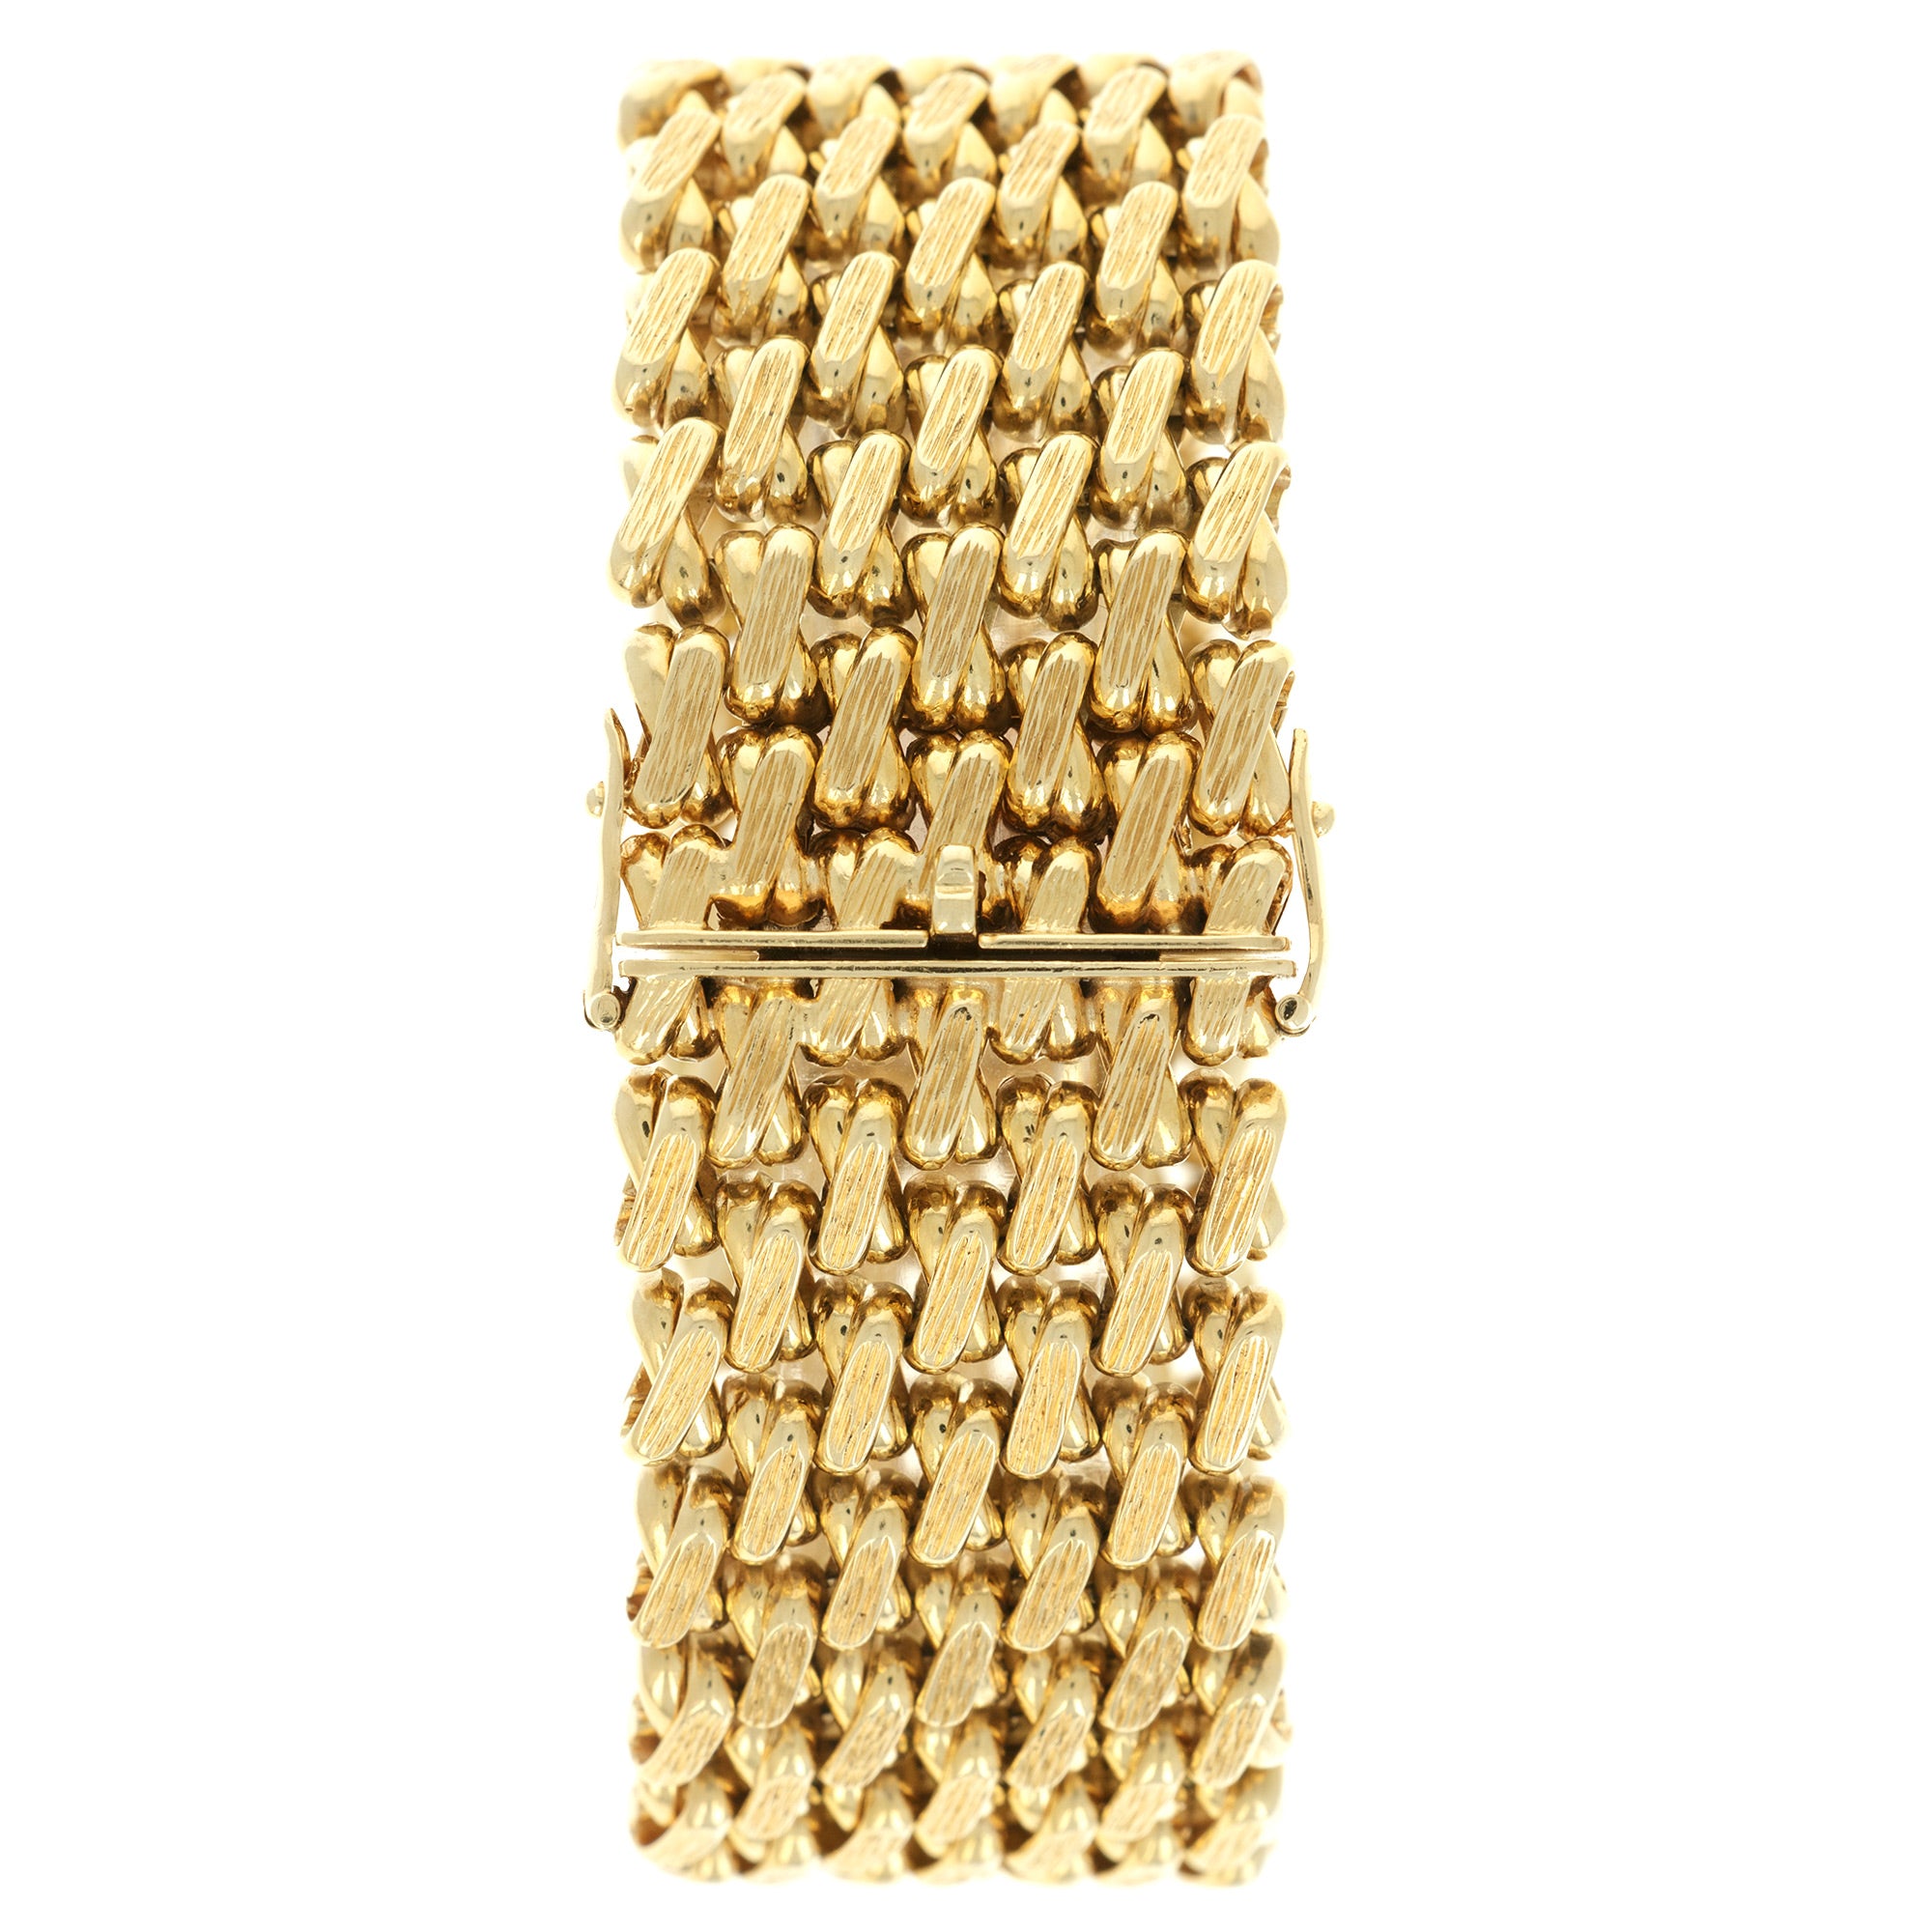 Piaget - Piaget Yellow Gold Wide Bracelet Watch, 1960s - The Keystone Watches